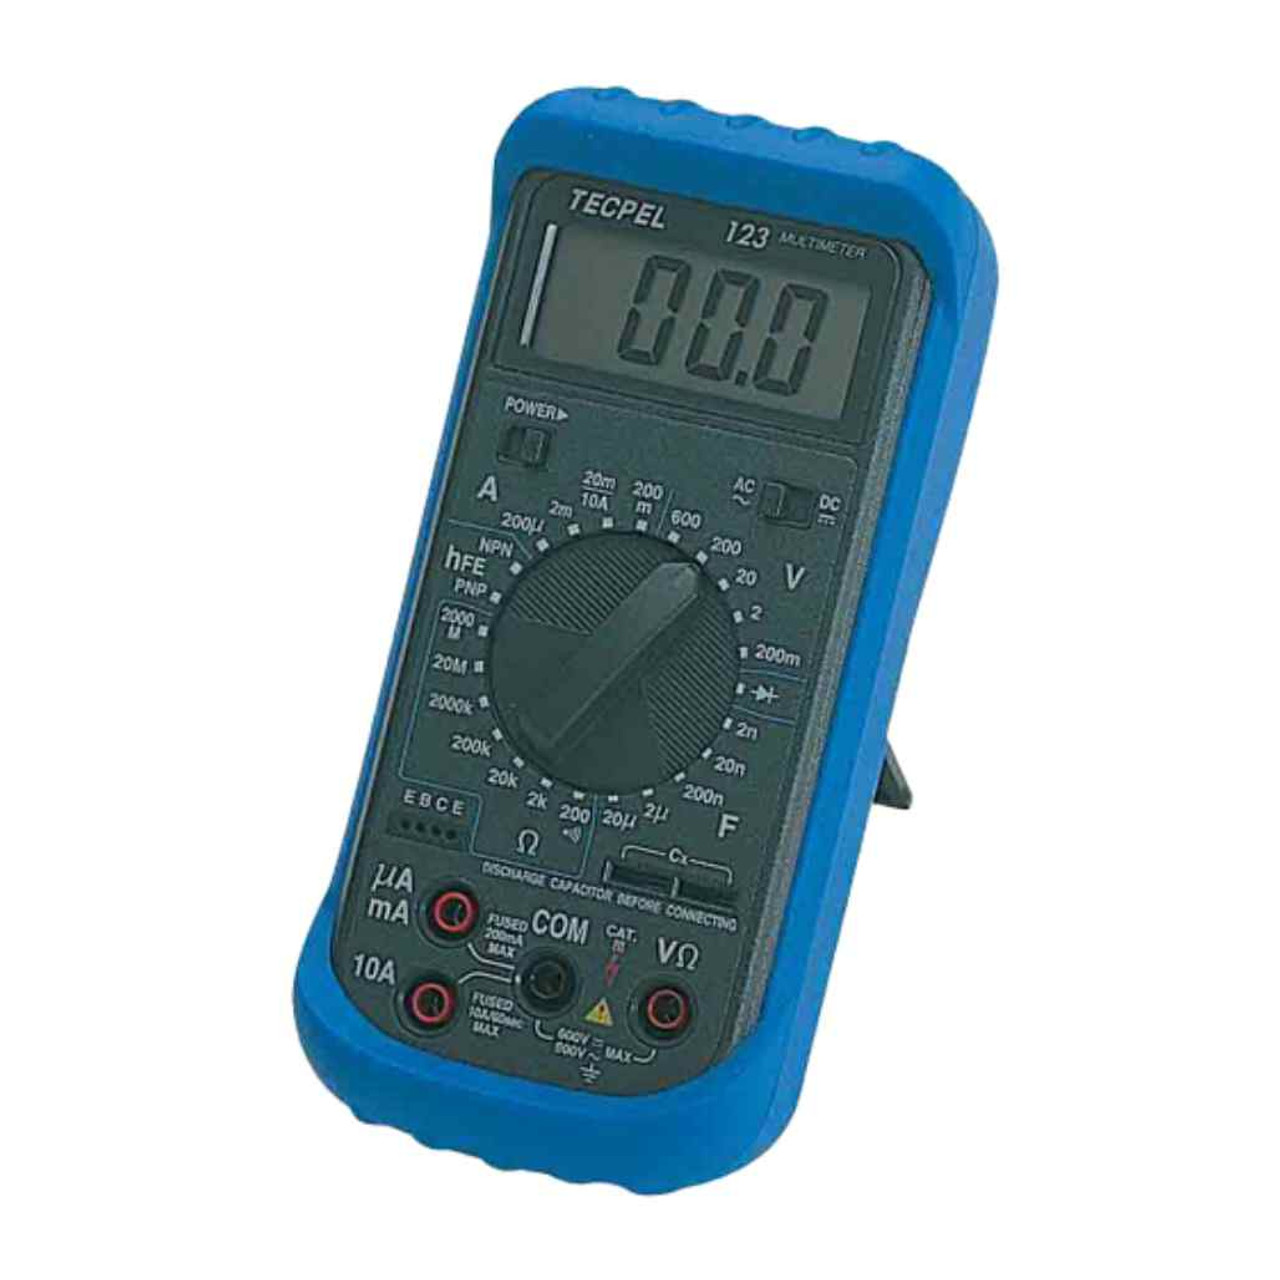 Analog Multimeter, that Combines Several Measurement Functions in